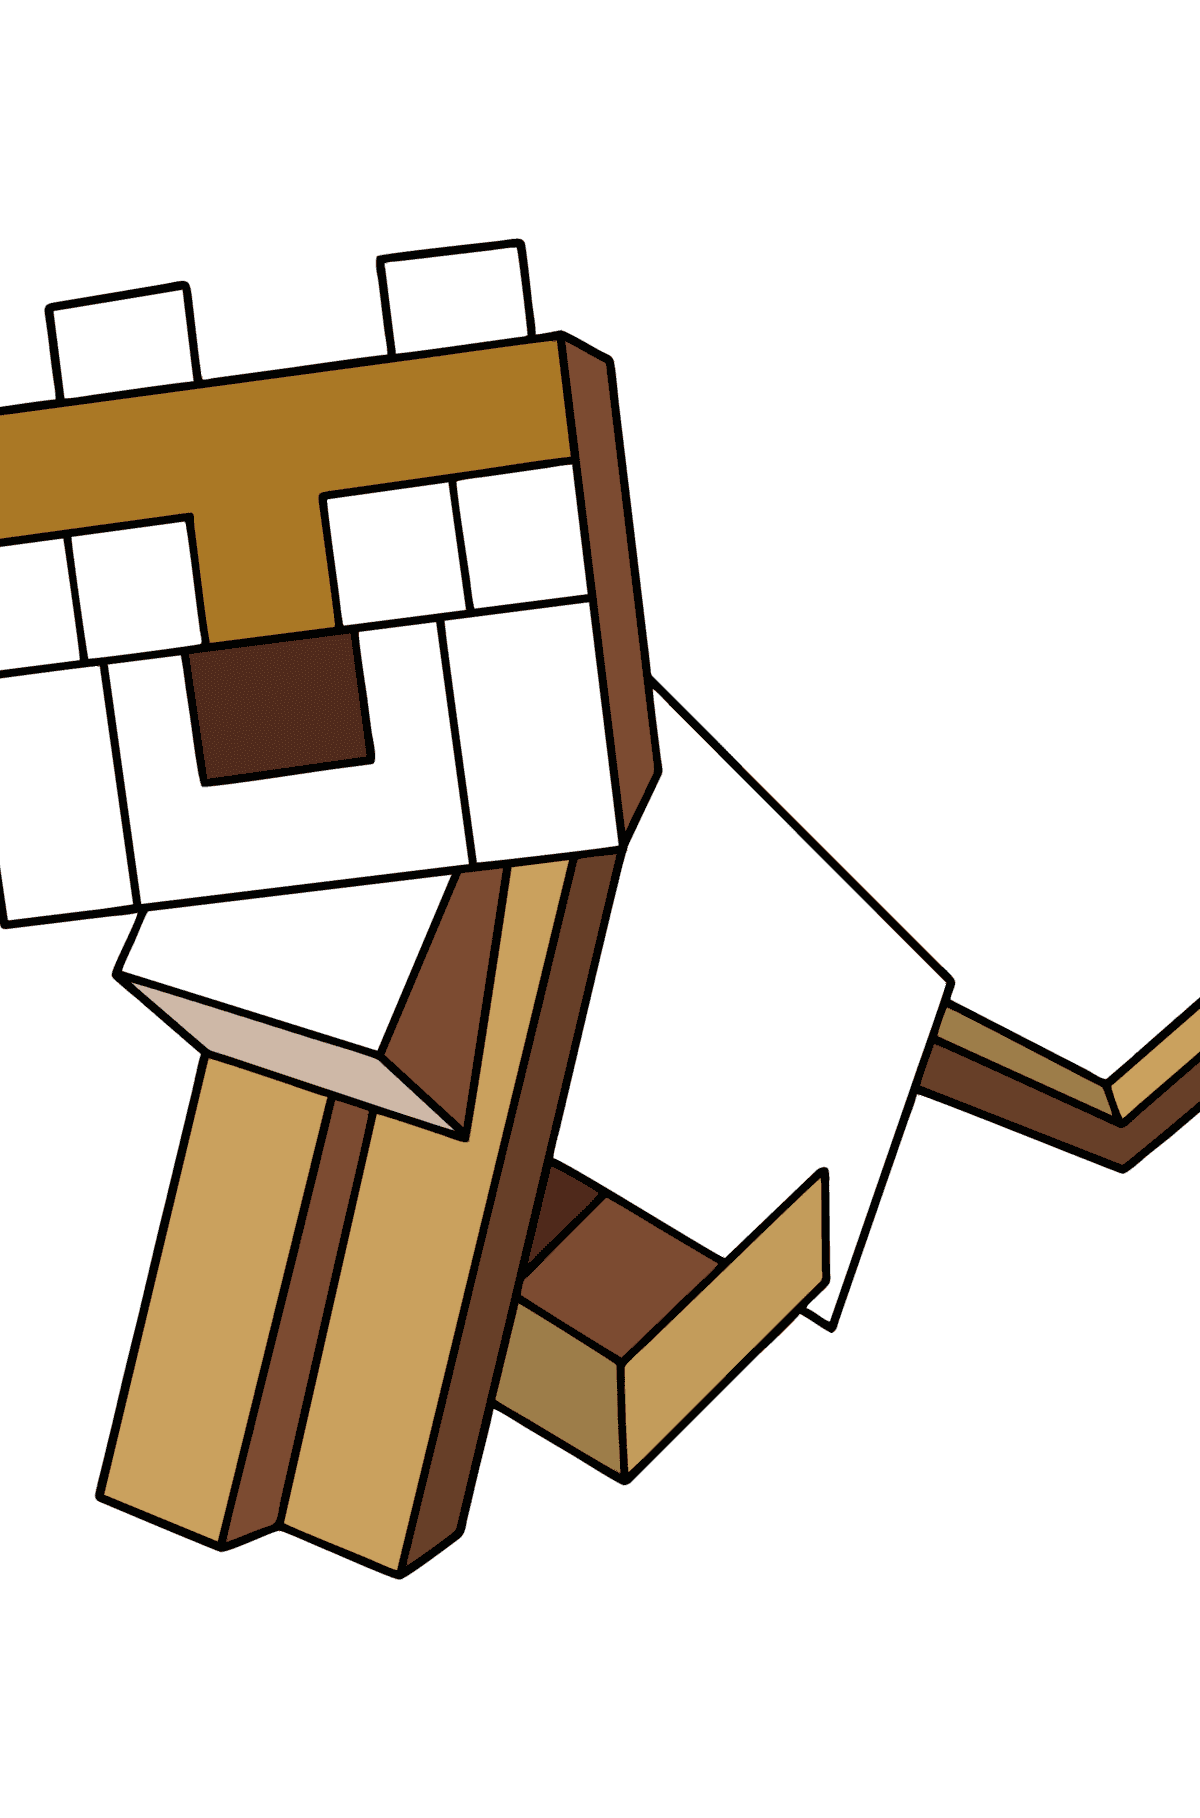 Minecraft Ocelot coloring page - Coloring Pages for Kids